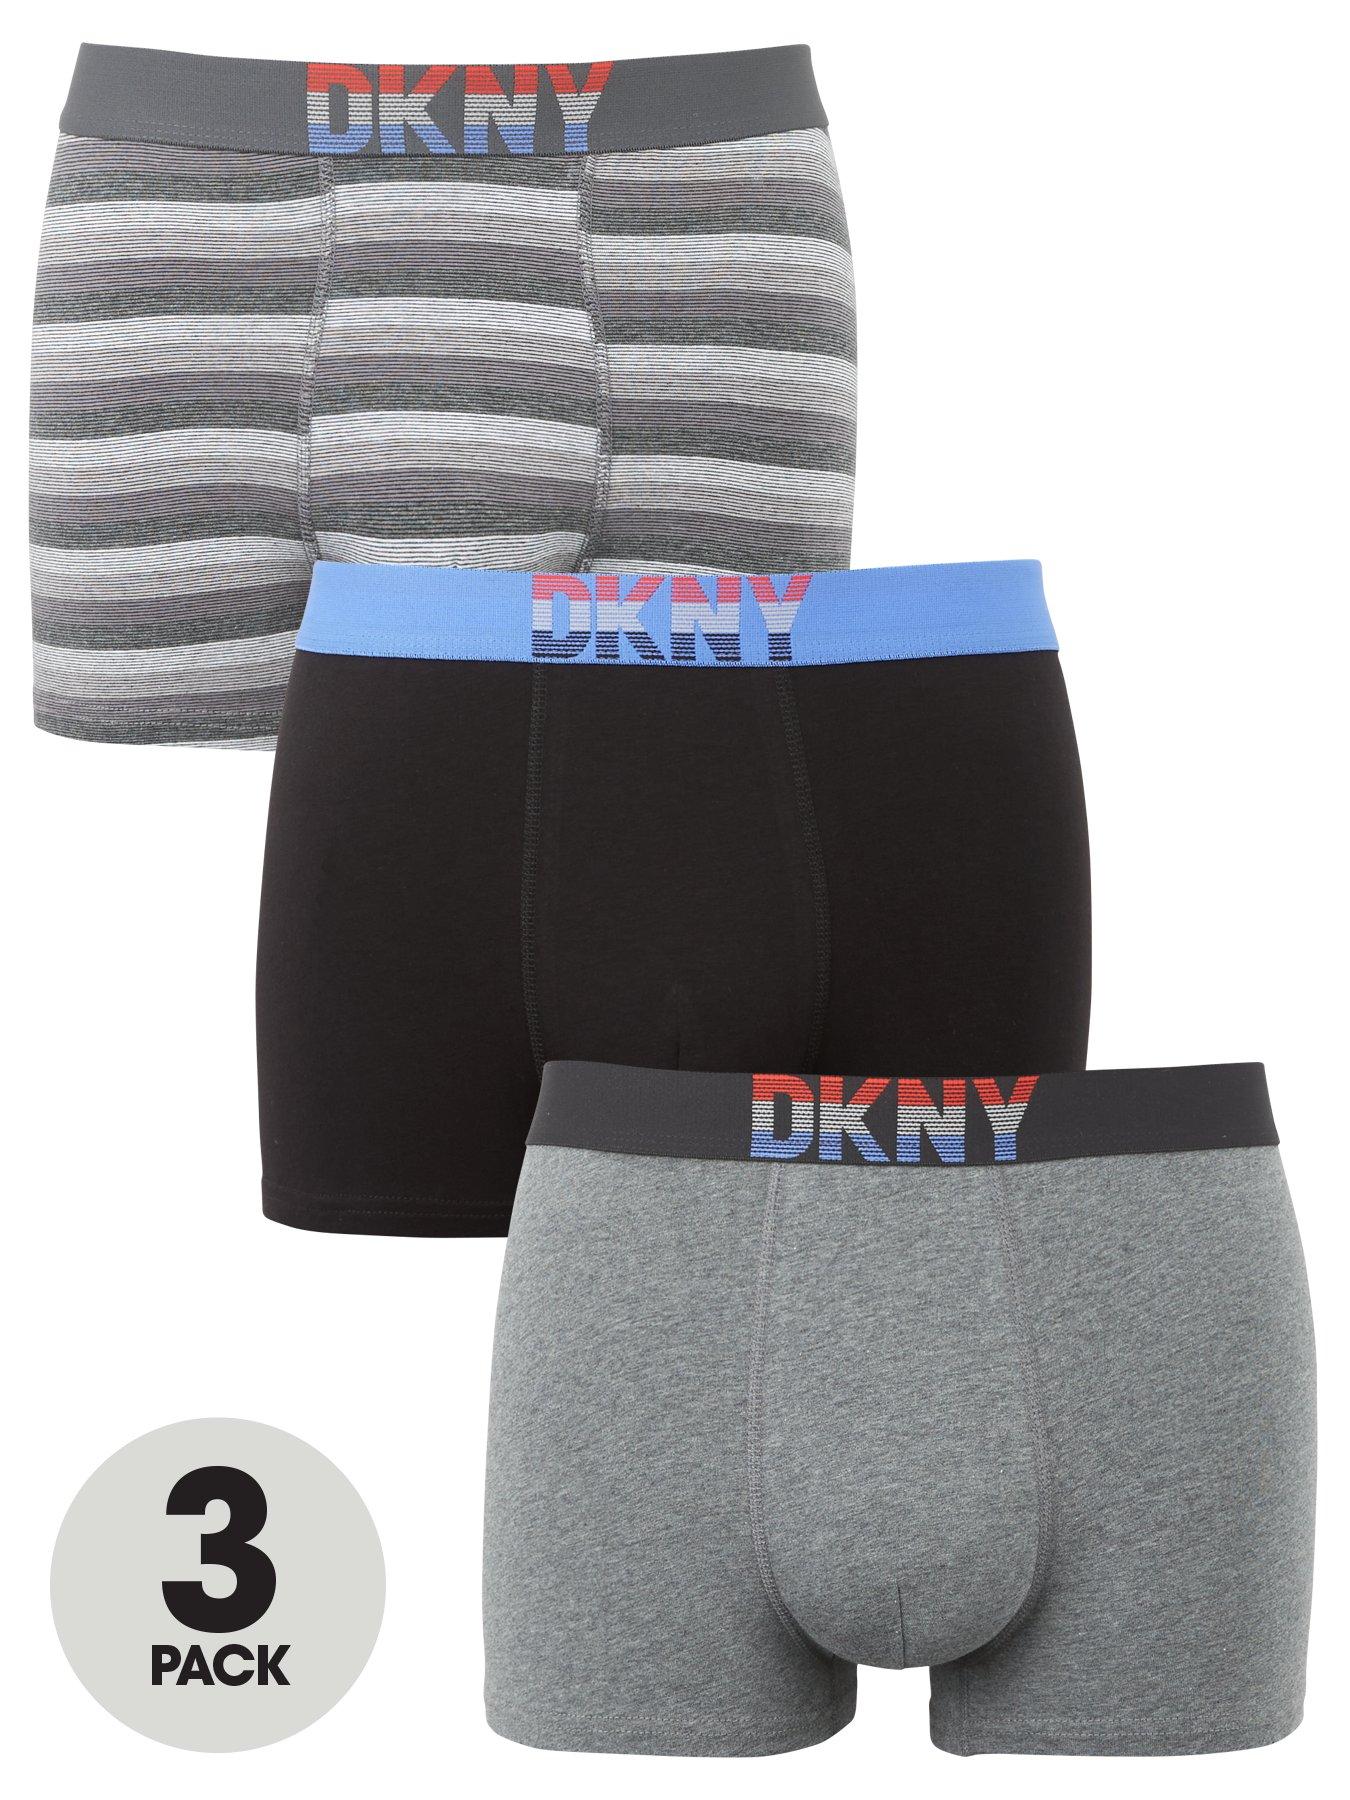 DKNY Underwear Mens 3 pack Trunks With Stretch Black